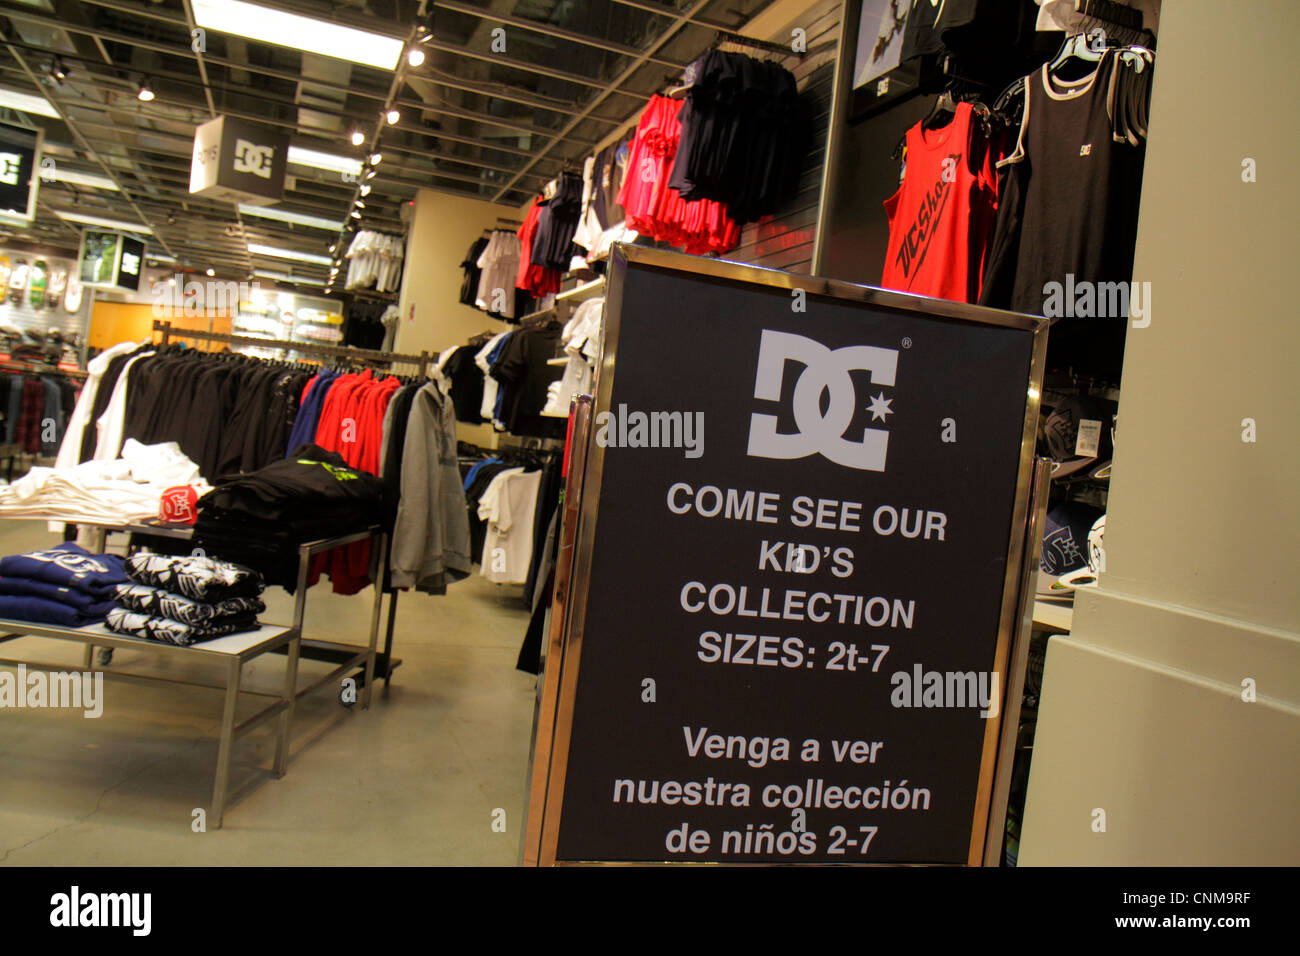 Miami Florida,Sweetwater,Dolphin mall,DC Shoes,retail products,display case  sale,merchandise,packaging,brands,fashion,trendy,luxury,clothing,apparel,a  Stock Photo - Alamy